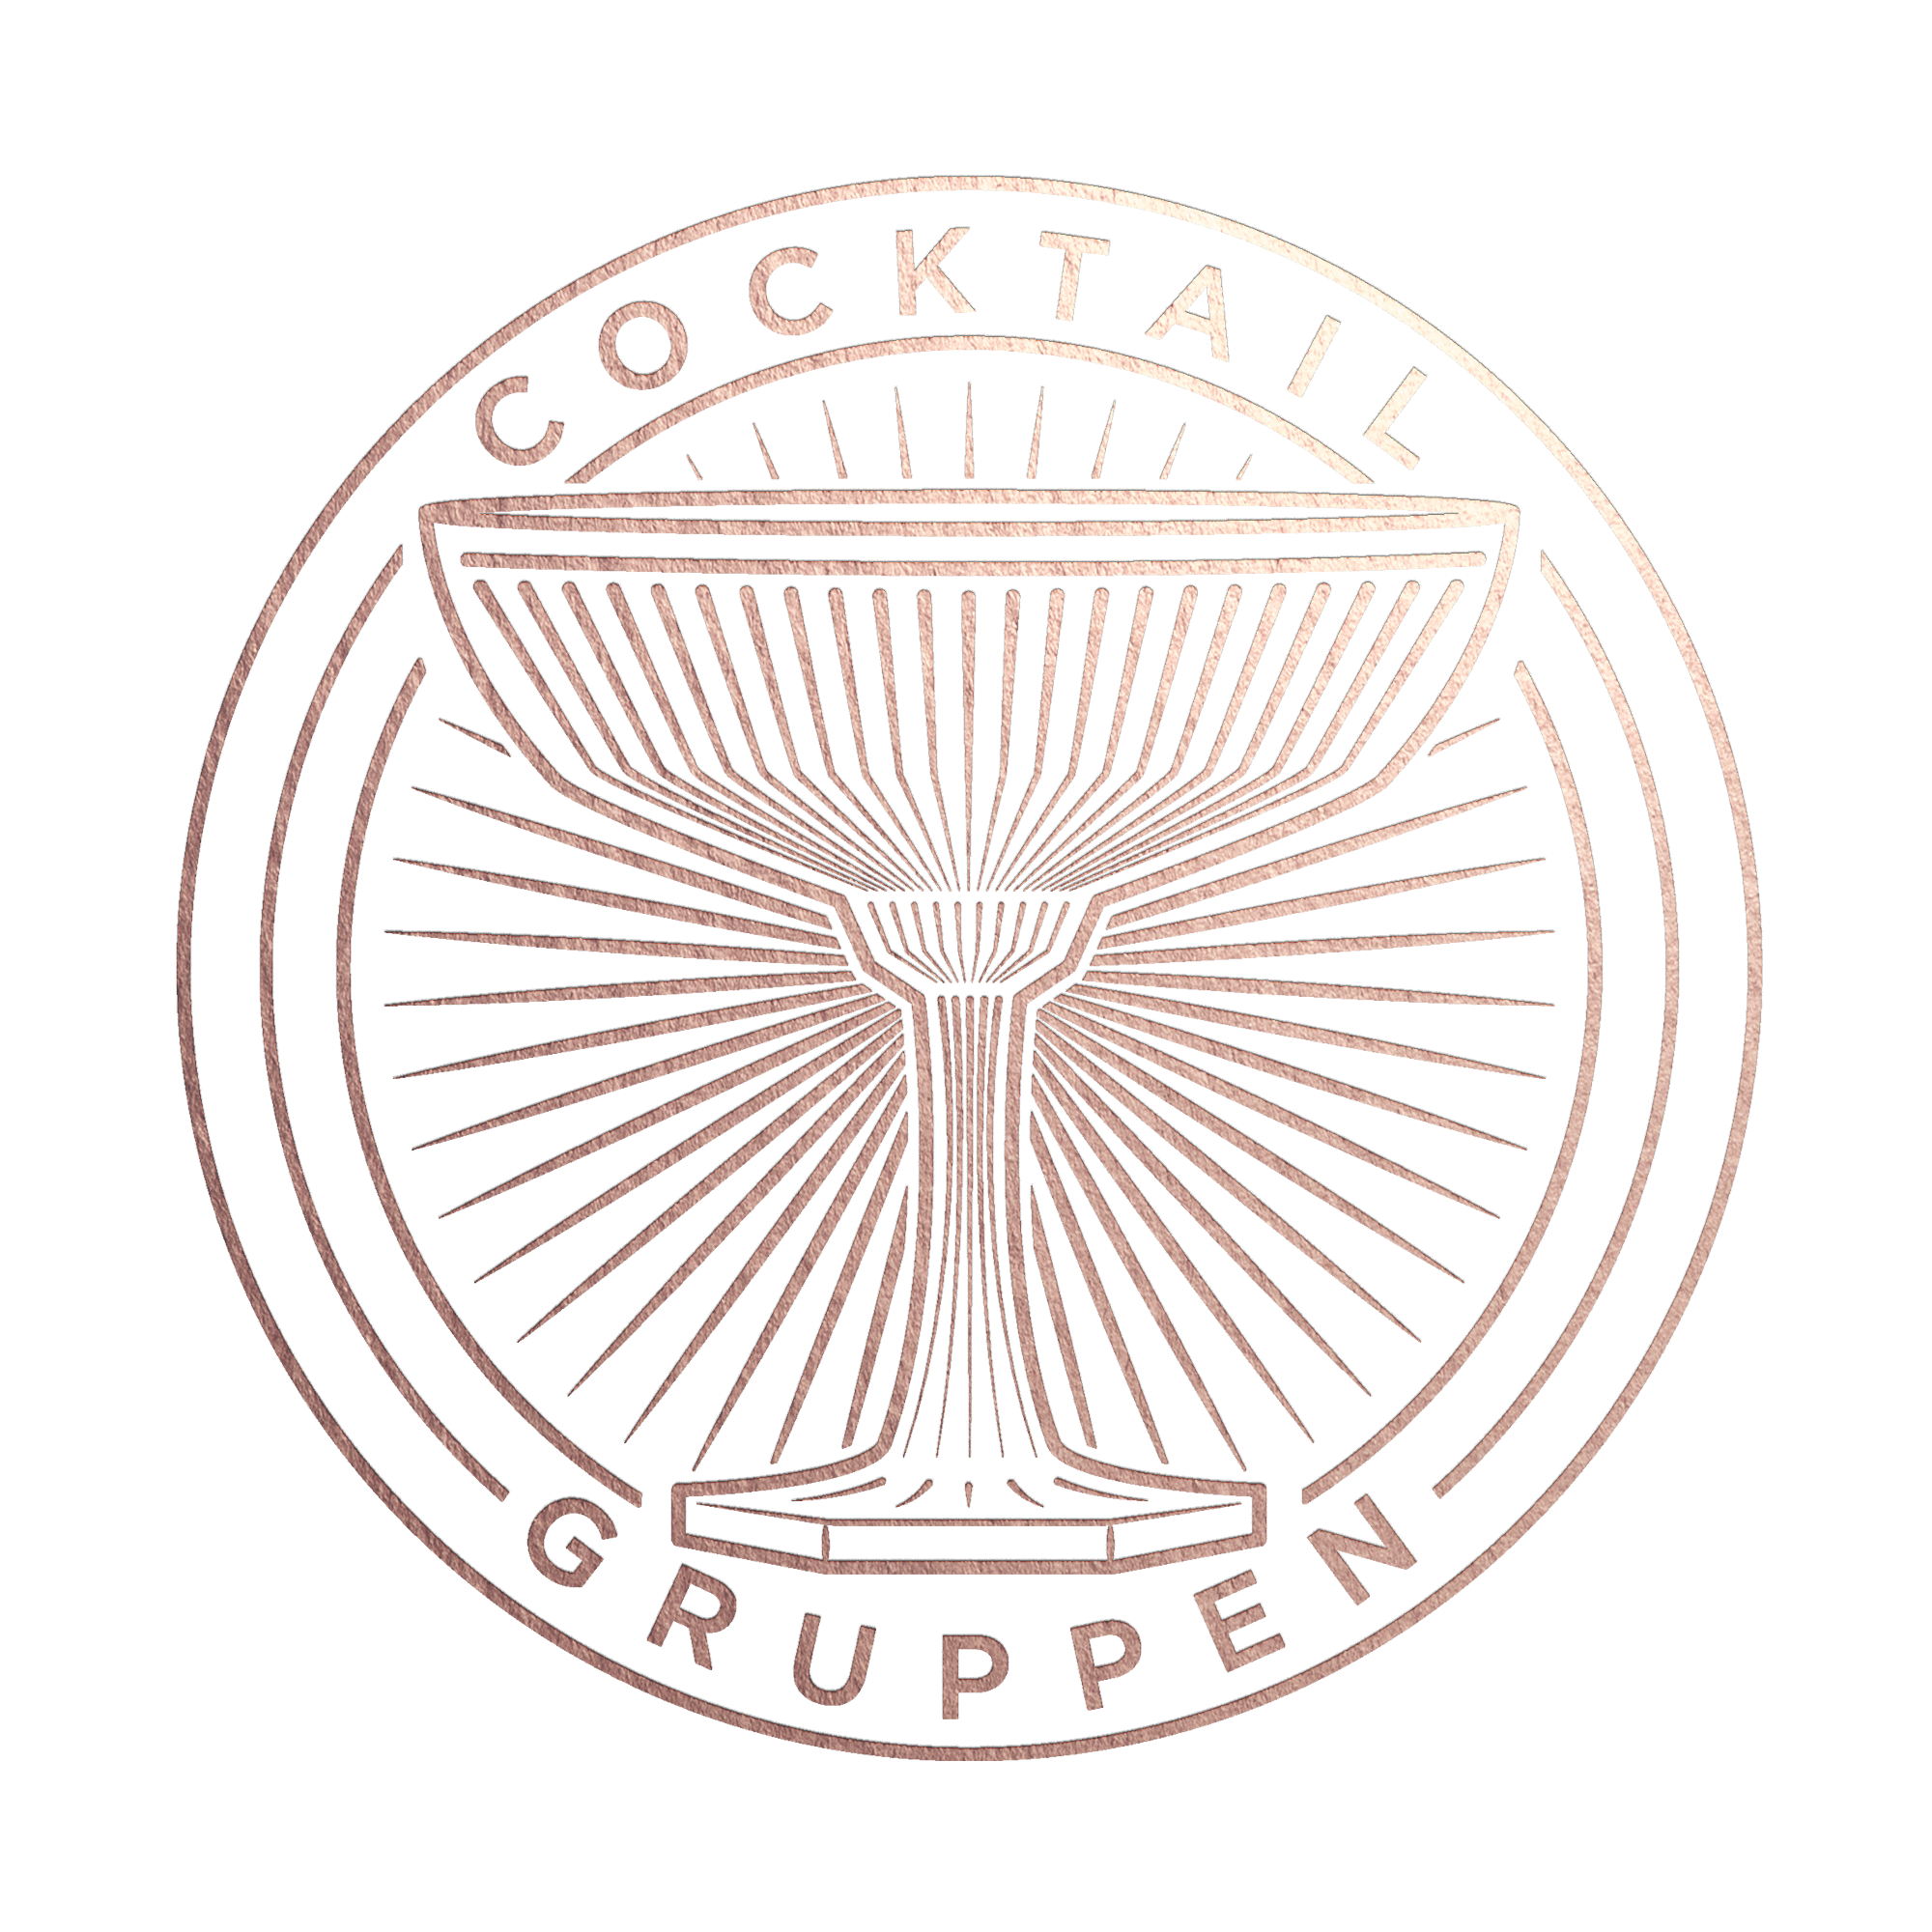 Cocktail_Gruppen_Circle_Copper_Opacitet70.png